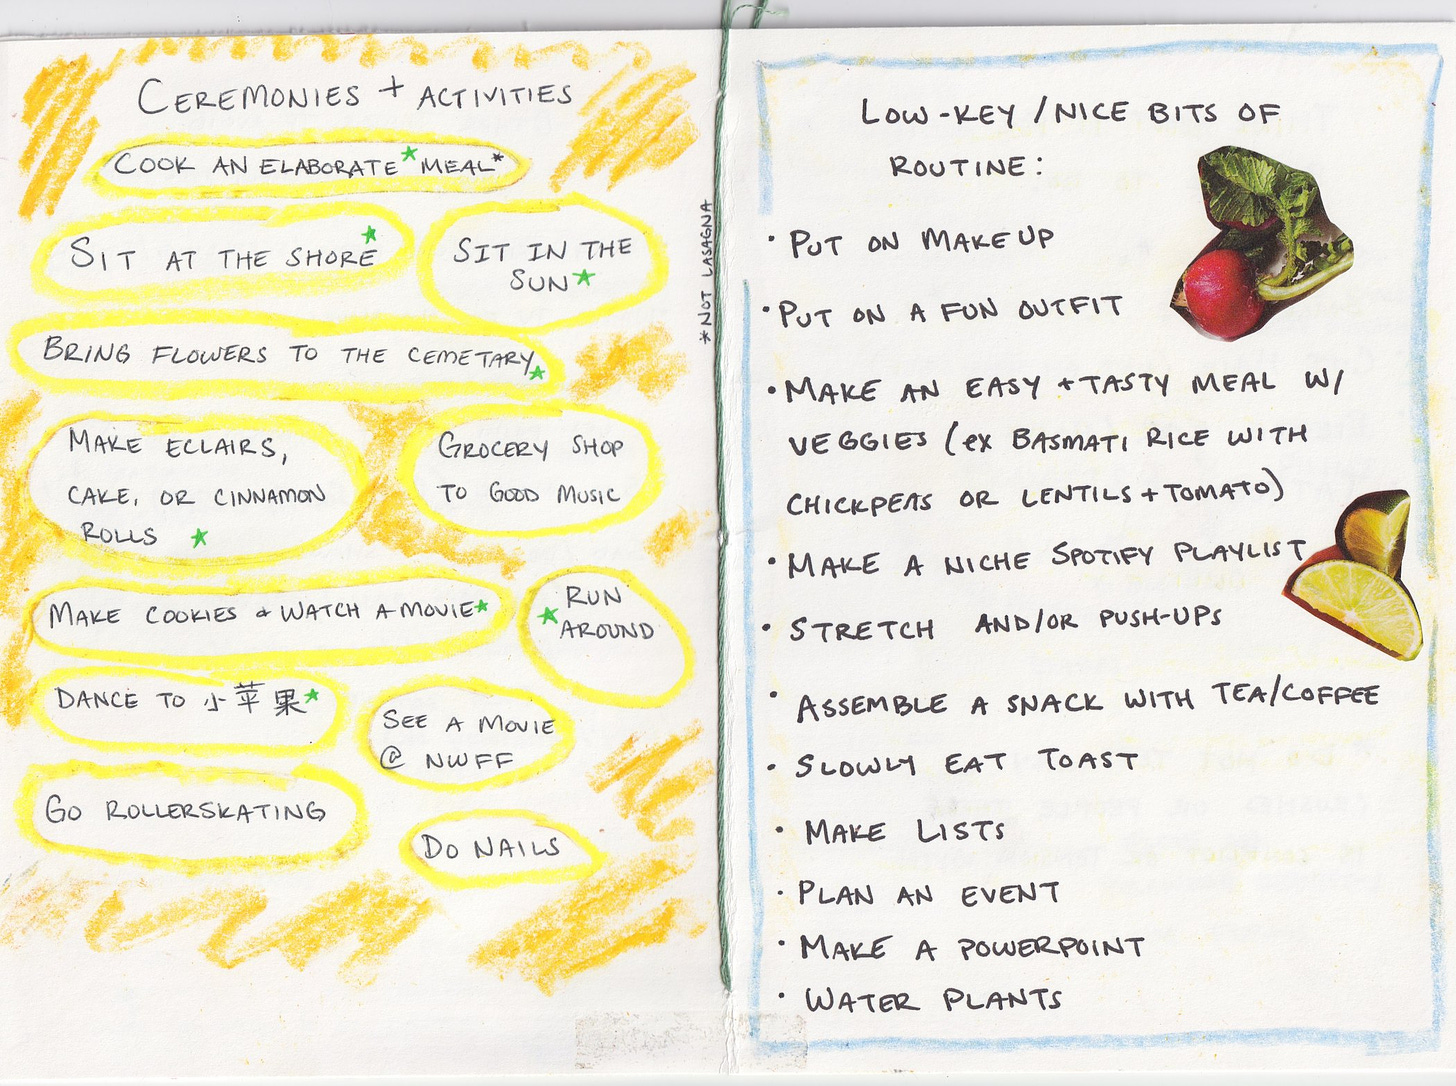 New page in yellow crayon, titled CEREMONIES AND ACTIVITIES Cook an elaborate meal* (not lasagna) , sit at the shore*, sit in the sun*, bring flowers to the cemetary*, make eclairs, cake or cinnamon rolls*, grocery shop to good music, make cookies & watch a movie*, run around*, dance to Little Apple*, see a movie @ NWFF, go rollerskating, do nails  A new page with a light blue border, titled LOW KEY/NICE BITS OF ROUTINE:  Put on makeup, put on a fun outfit, make an easy and tasty meal with veggies (like basmati rice with chickpeas or lentils and tomato), make a niche spotify playlist, stretch and/or push-ups, assemble a snack with tea/coffee, slowly eat toast, make lists, plan an event, make a powerpoint, water plants.  Magazine cut outs of a radish and some limes is blued for decoration in the margins. 